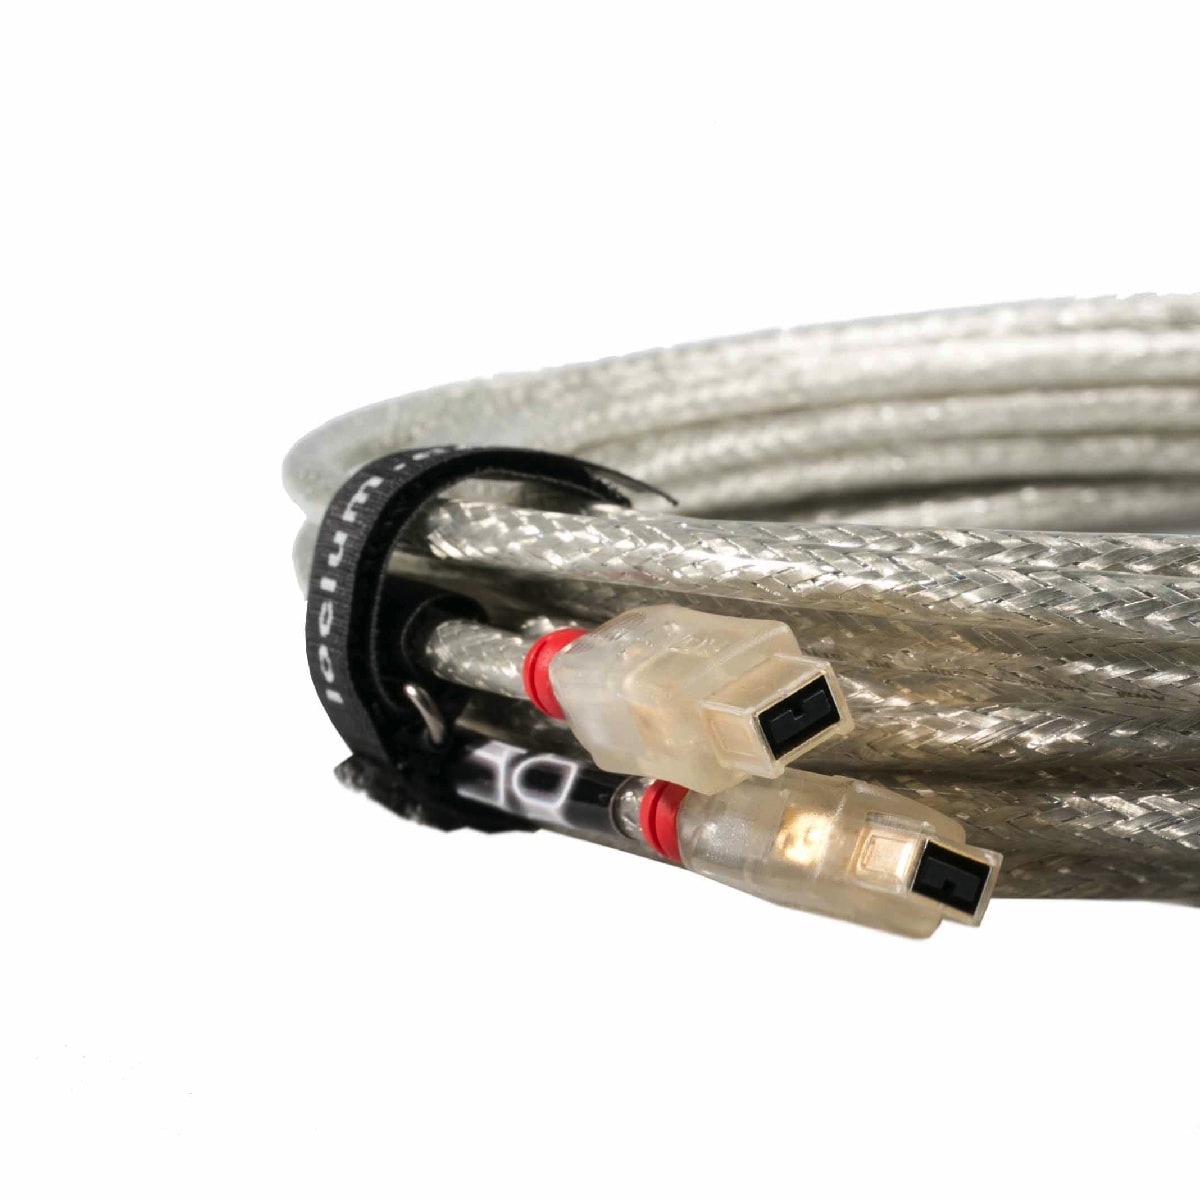  Firewire Cable (9pin/9pin), 10m